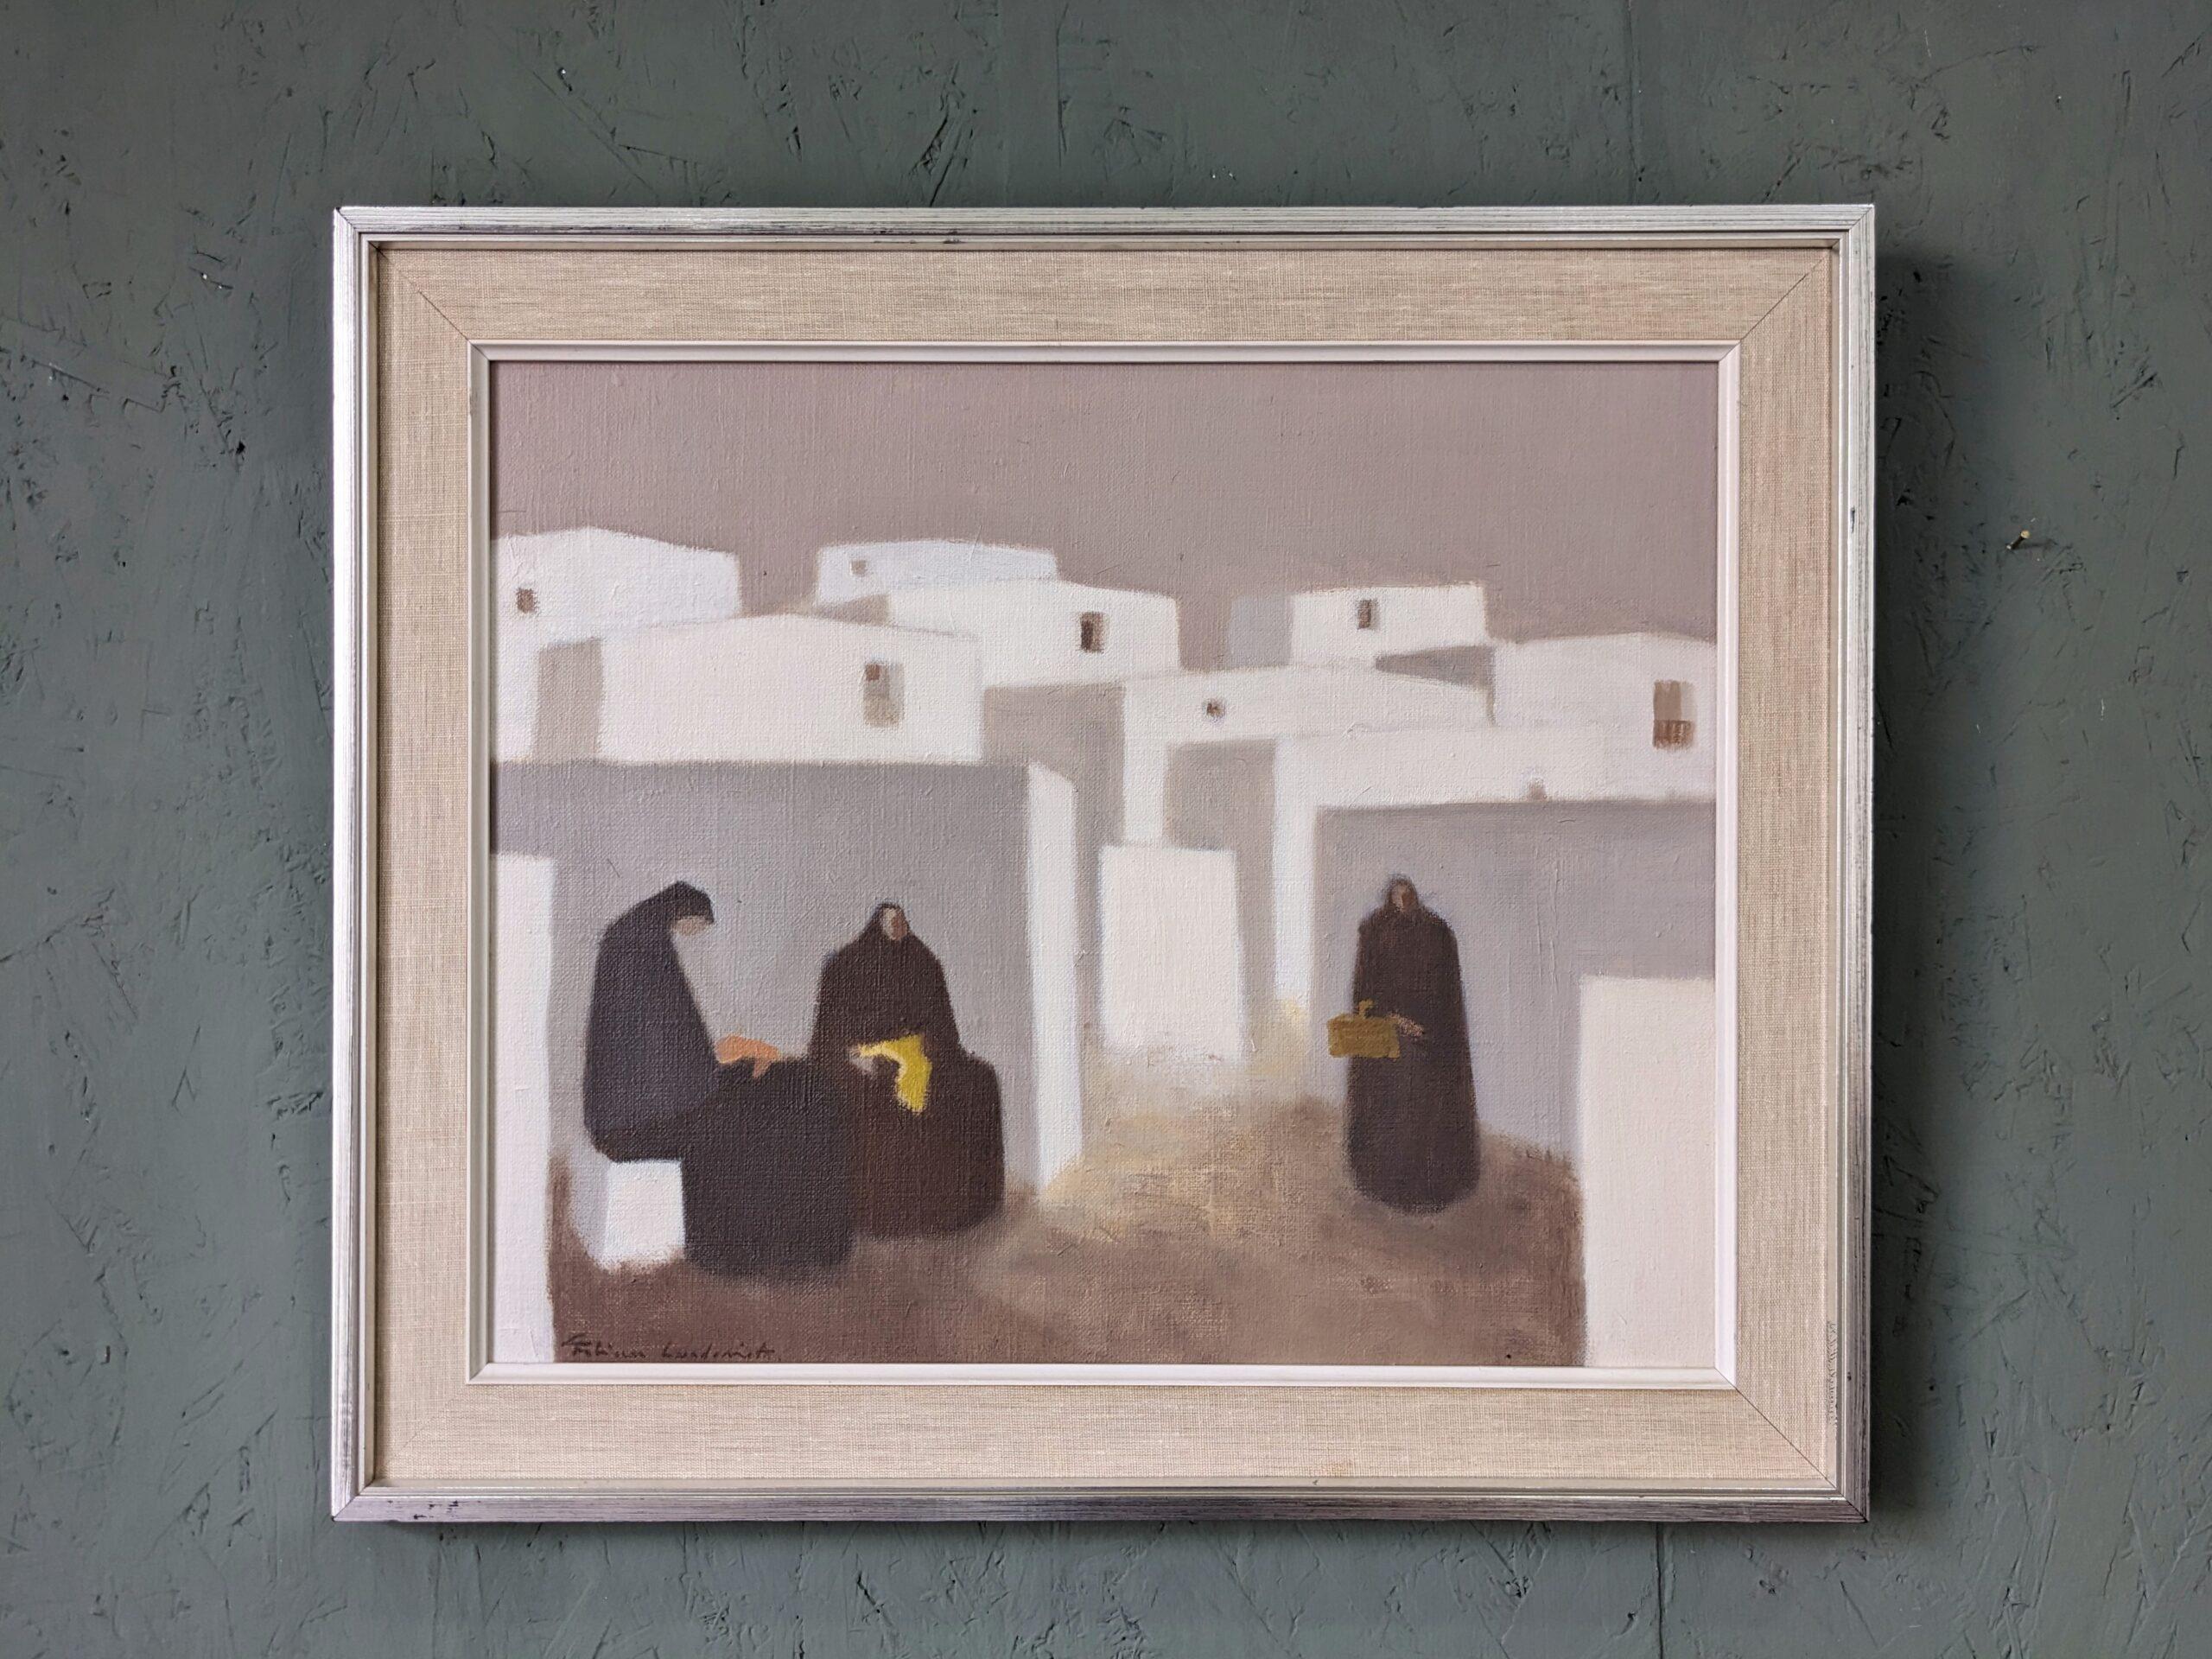 WHITE TOWN
Size: 48 x 56 cm (including frame)
Oil on canvas

A subtle and outstanding mid-century figurative painting, executed in oil onto canvas by the established Swedish artist Fabian Lundqvist (1913-1989), whose works have been represented in